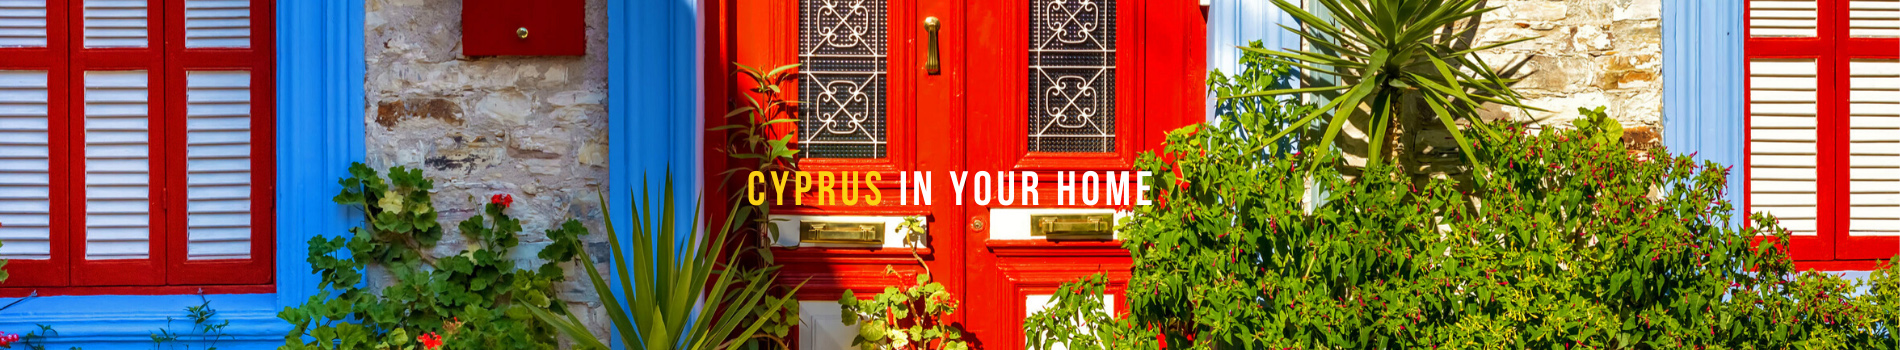 VisitCyprusFromHome